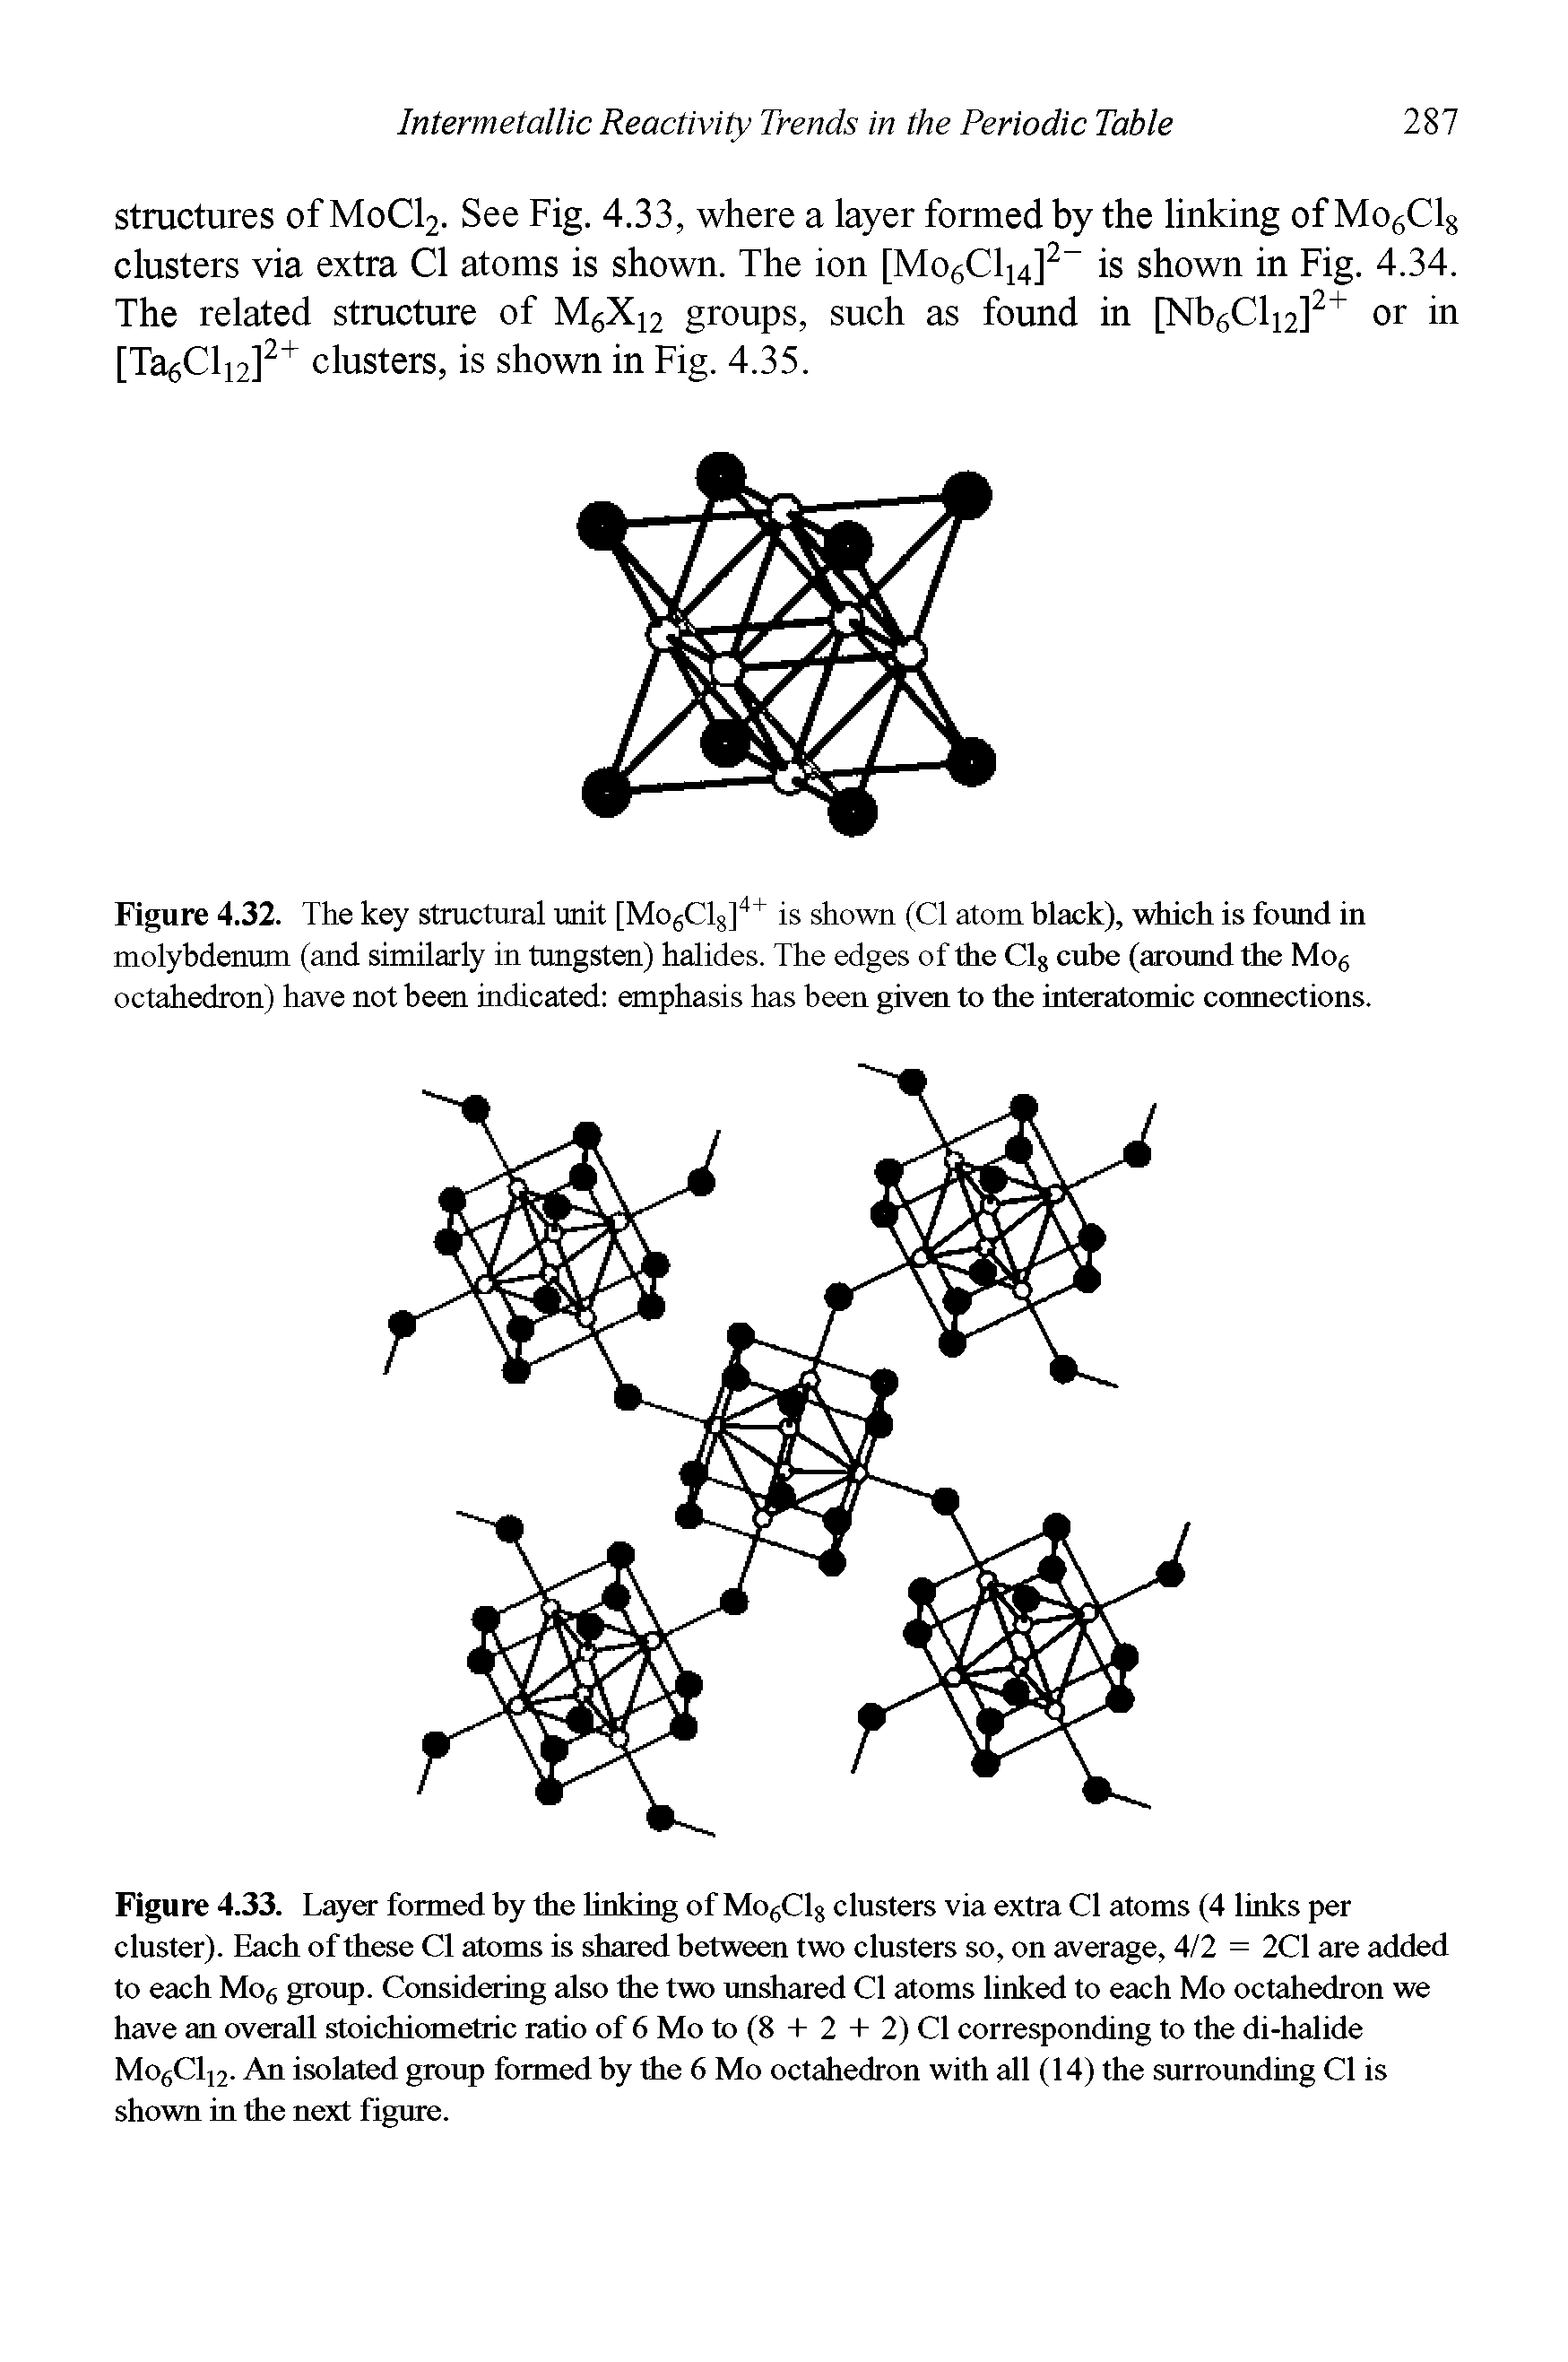 Figure 4.32. The key structural unit [Mo6Cl8]4+ is shown (Cl atom black), which is found in molybdenum (and similarly in tungsten) halides. The edges of the Cl8 cube (around the Mo6 octahedron) have not been indicated emphasis has been given to the interatomic connections.